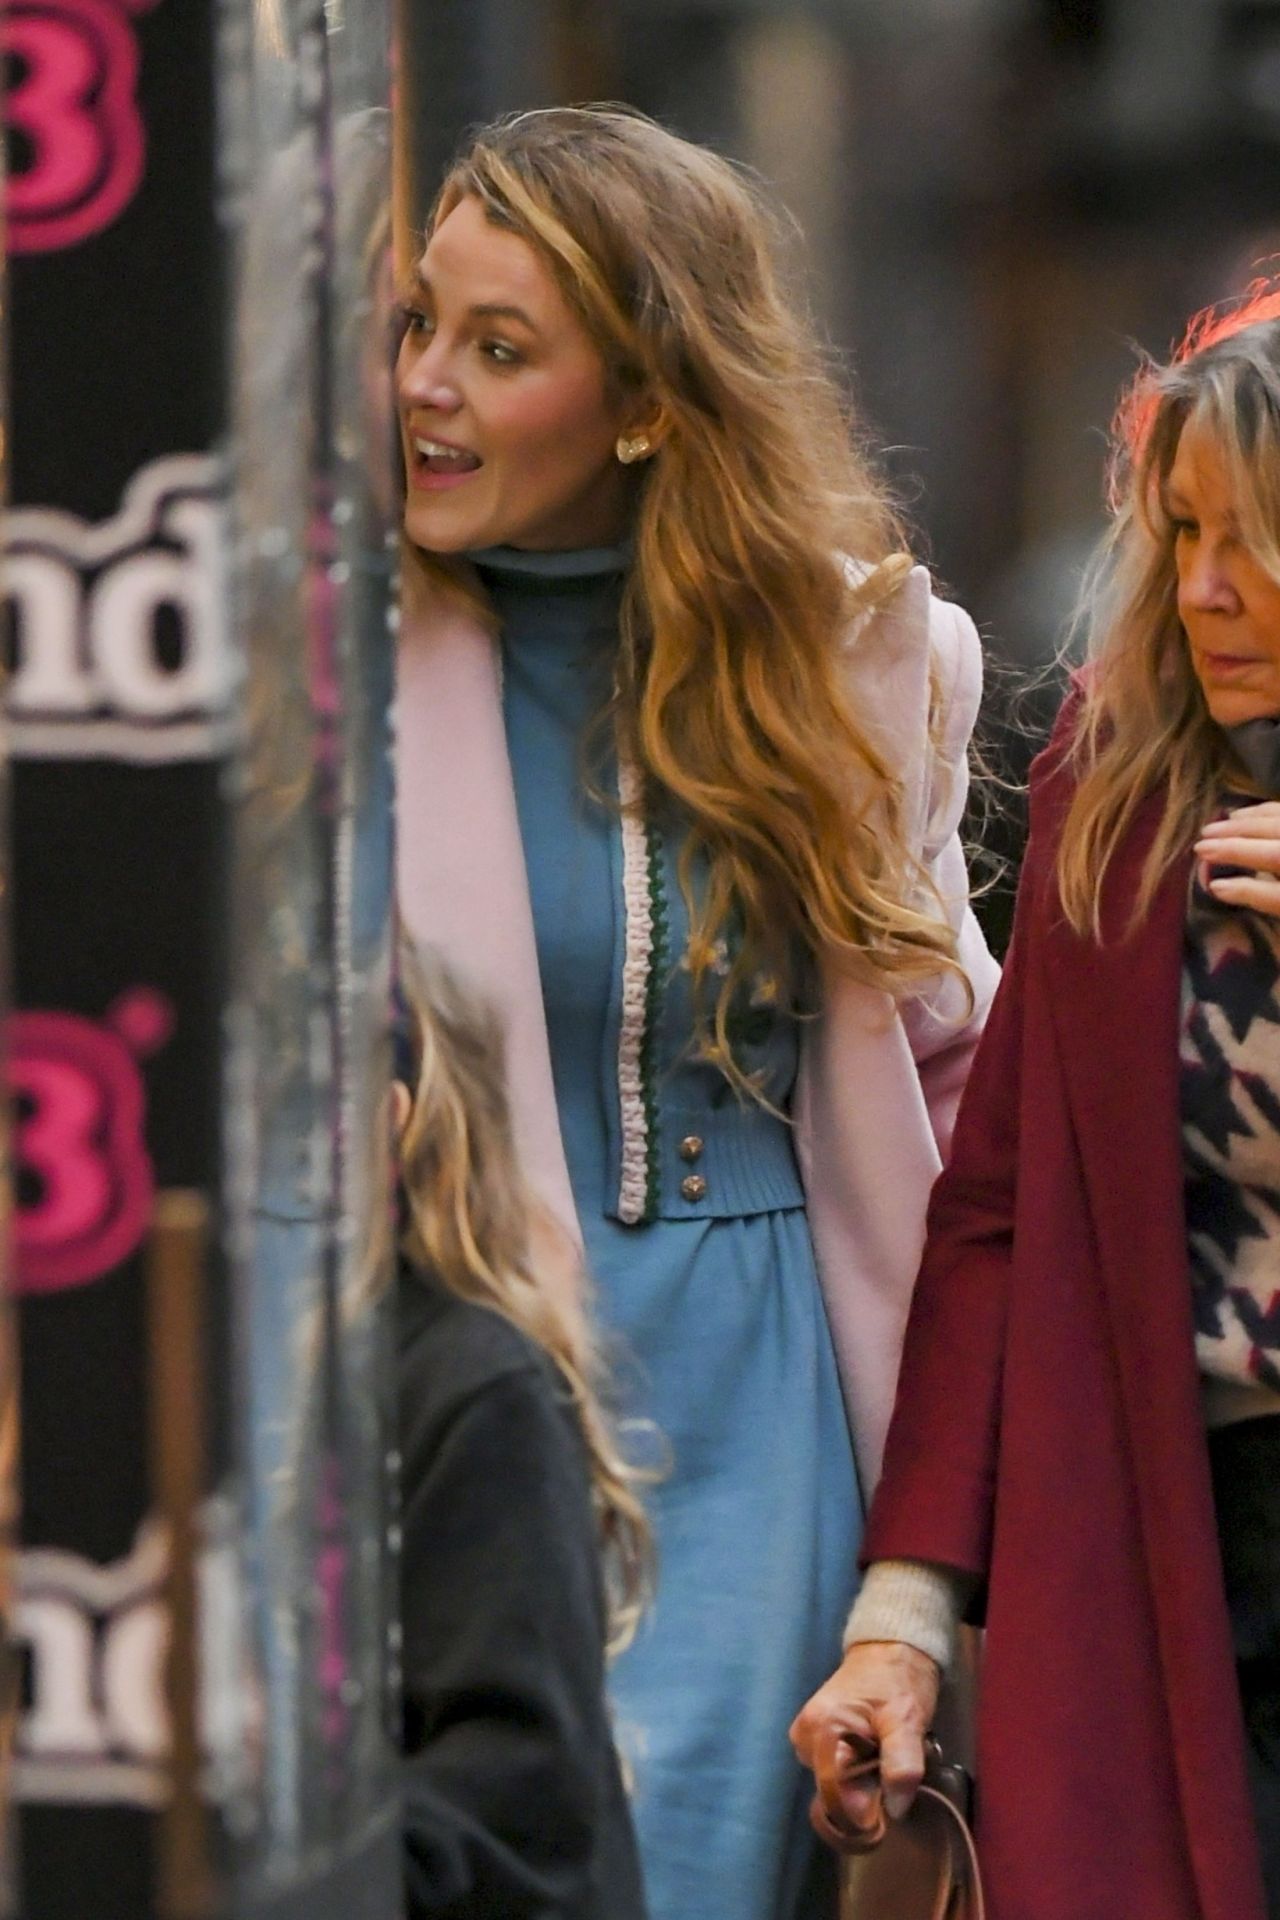 Blake Lively Day out at Serendipity 3, NYC 2